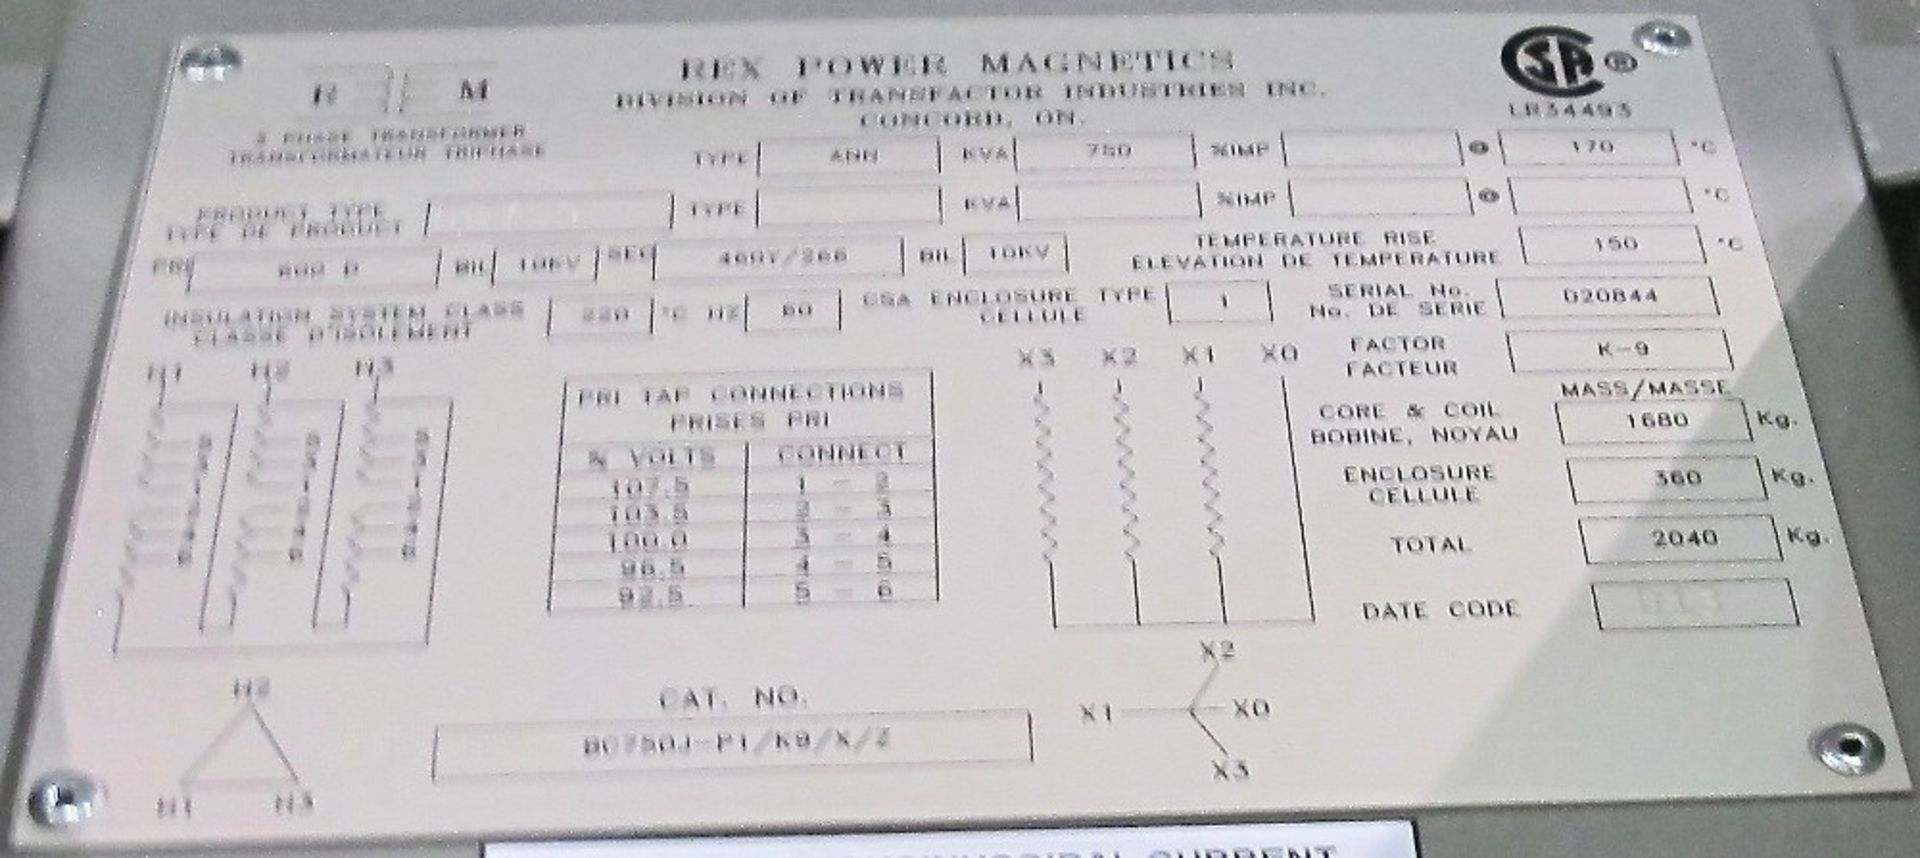 REX POWER MAGNETICS 750KVA TRANSFORMER, 600D PRIMARY, 460Y/266 SECONDARY - Image 2 of 2